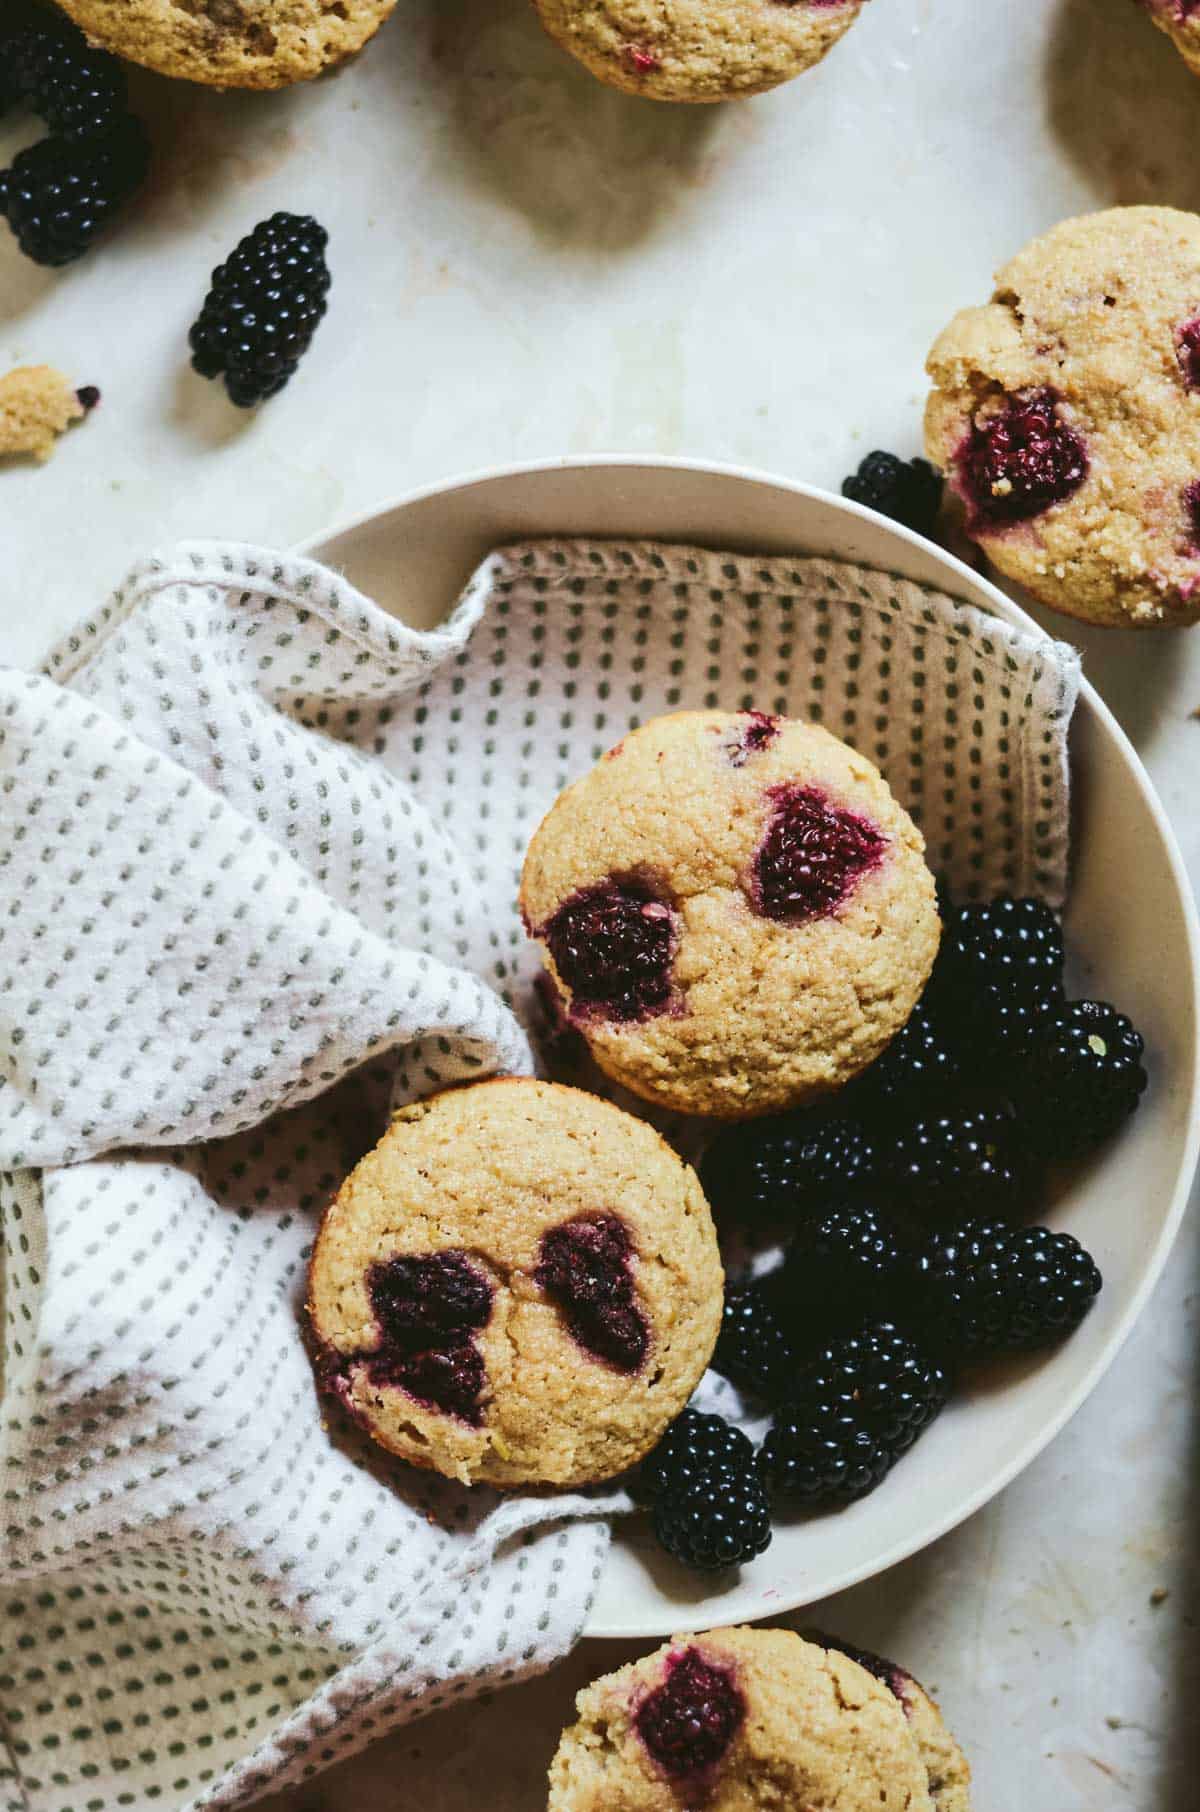 Blackberry muffins in a serving bowl with fresh blackberries in the bowl.